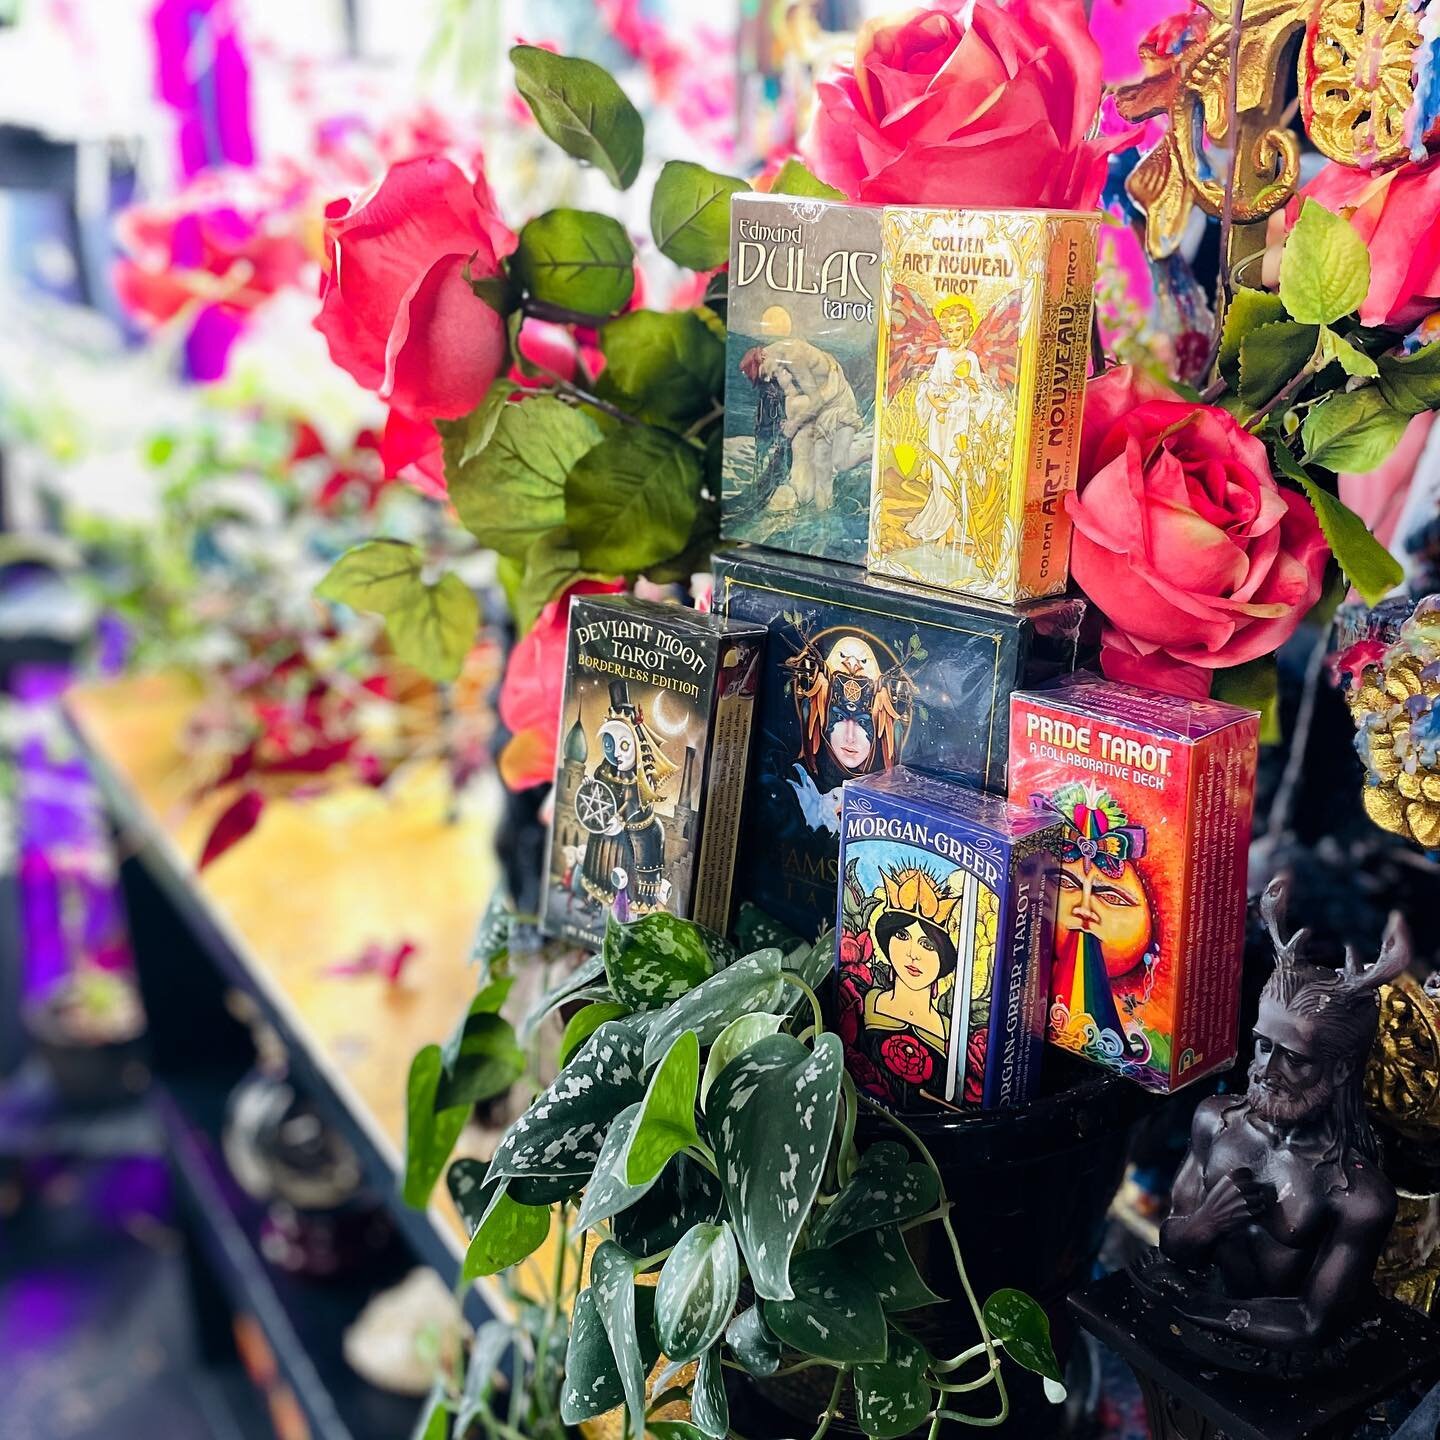 New tarot cards and oracle cards are in! Come swing by and pick up your new deck. ✨💫
.
.
.
.
.
#smallbusiness #tarot #tarotcards #occult #occultstore #headshop #tarotofig #witchy #witchesofinstagram #tarotreading #smallbusiness #shoplocal